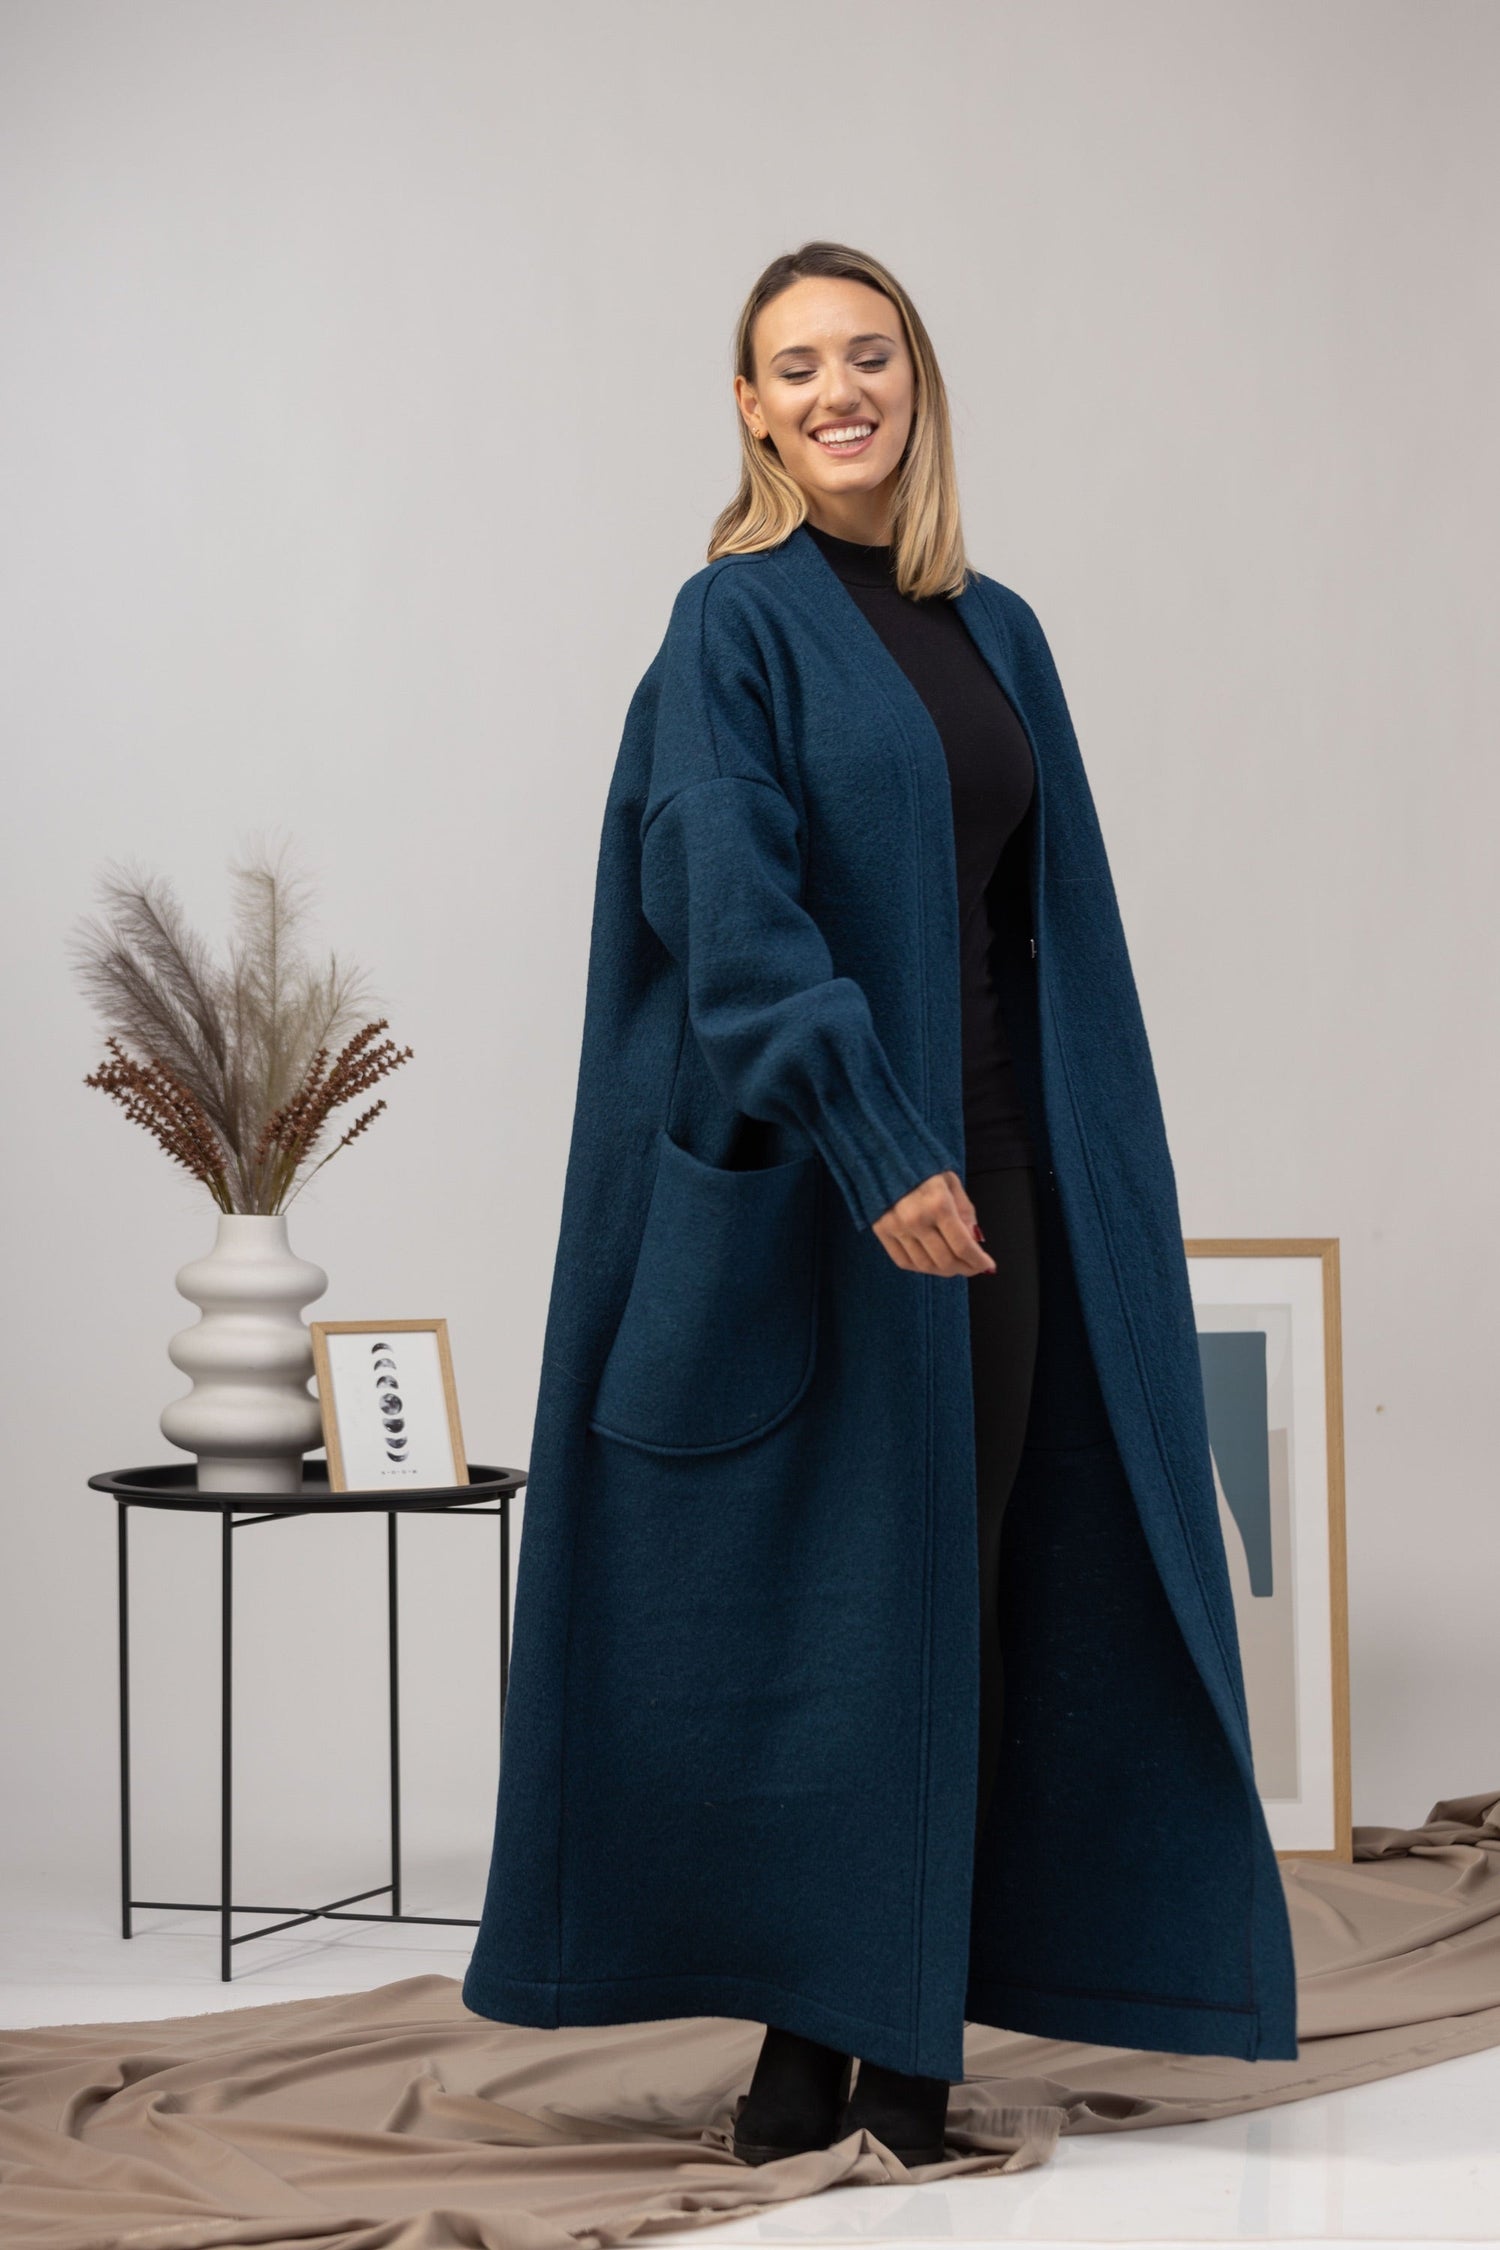 Charcoal Warm Wool Maxi Cardigan Hook Closure in Action - from Nikka Place | Effortless fashion for easy living